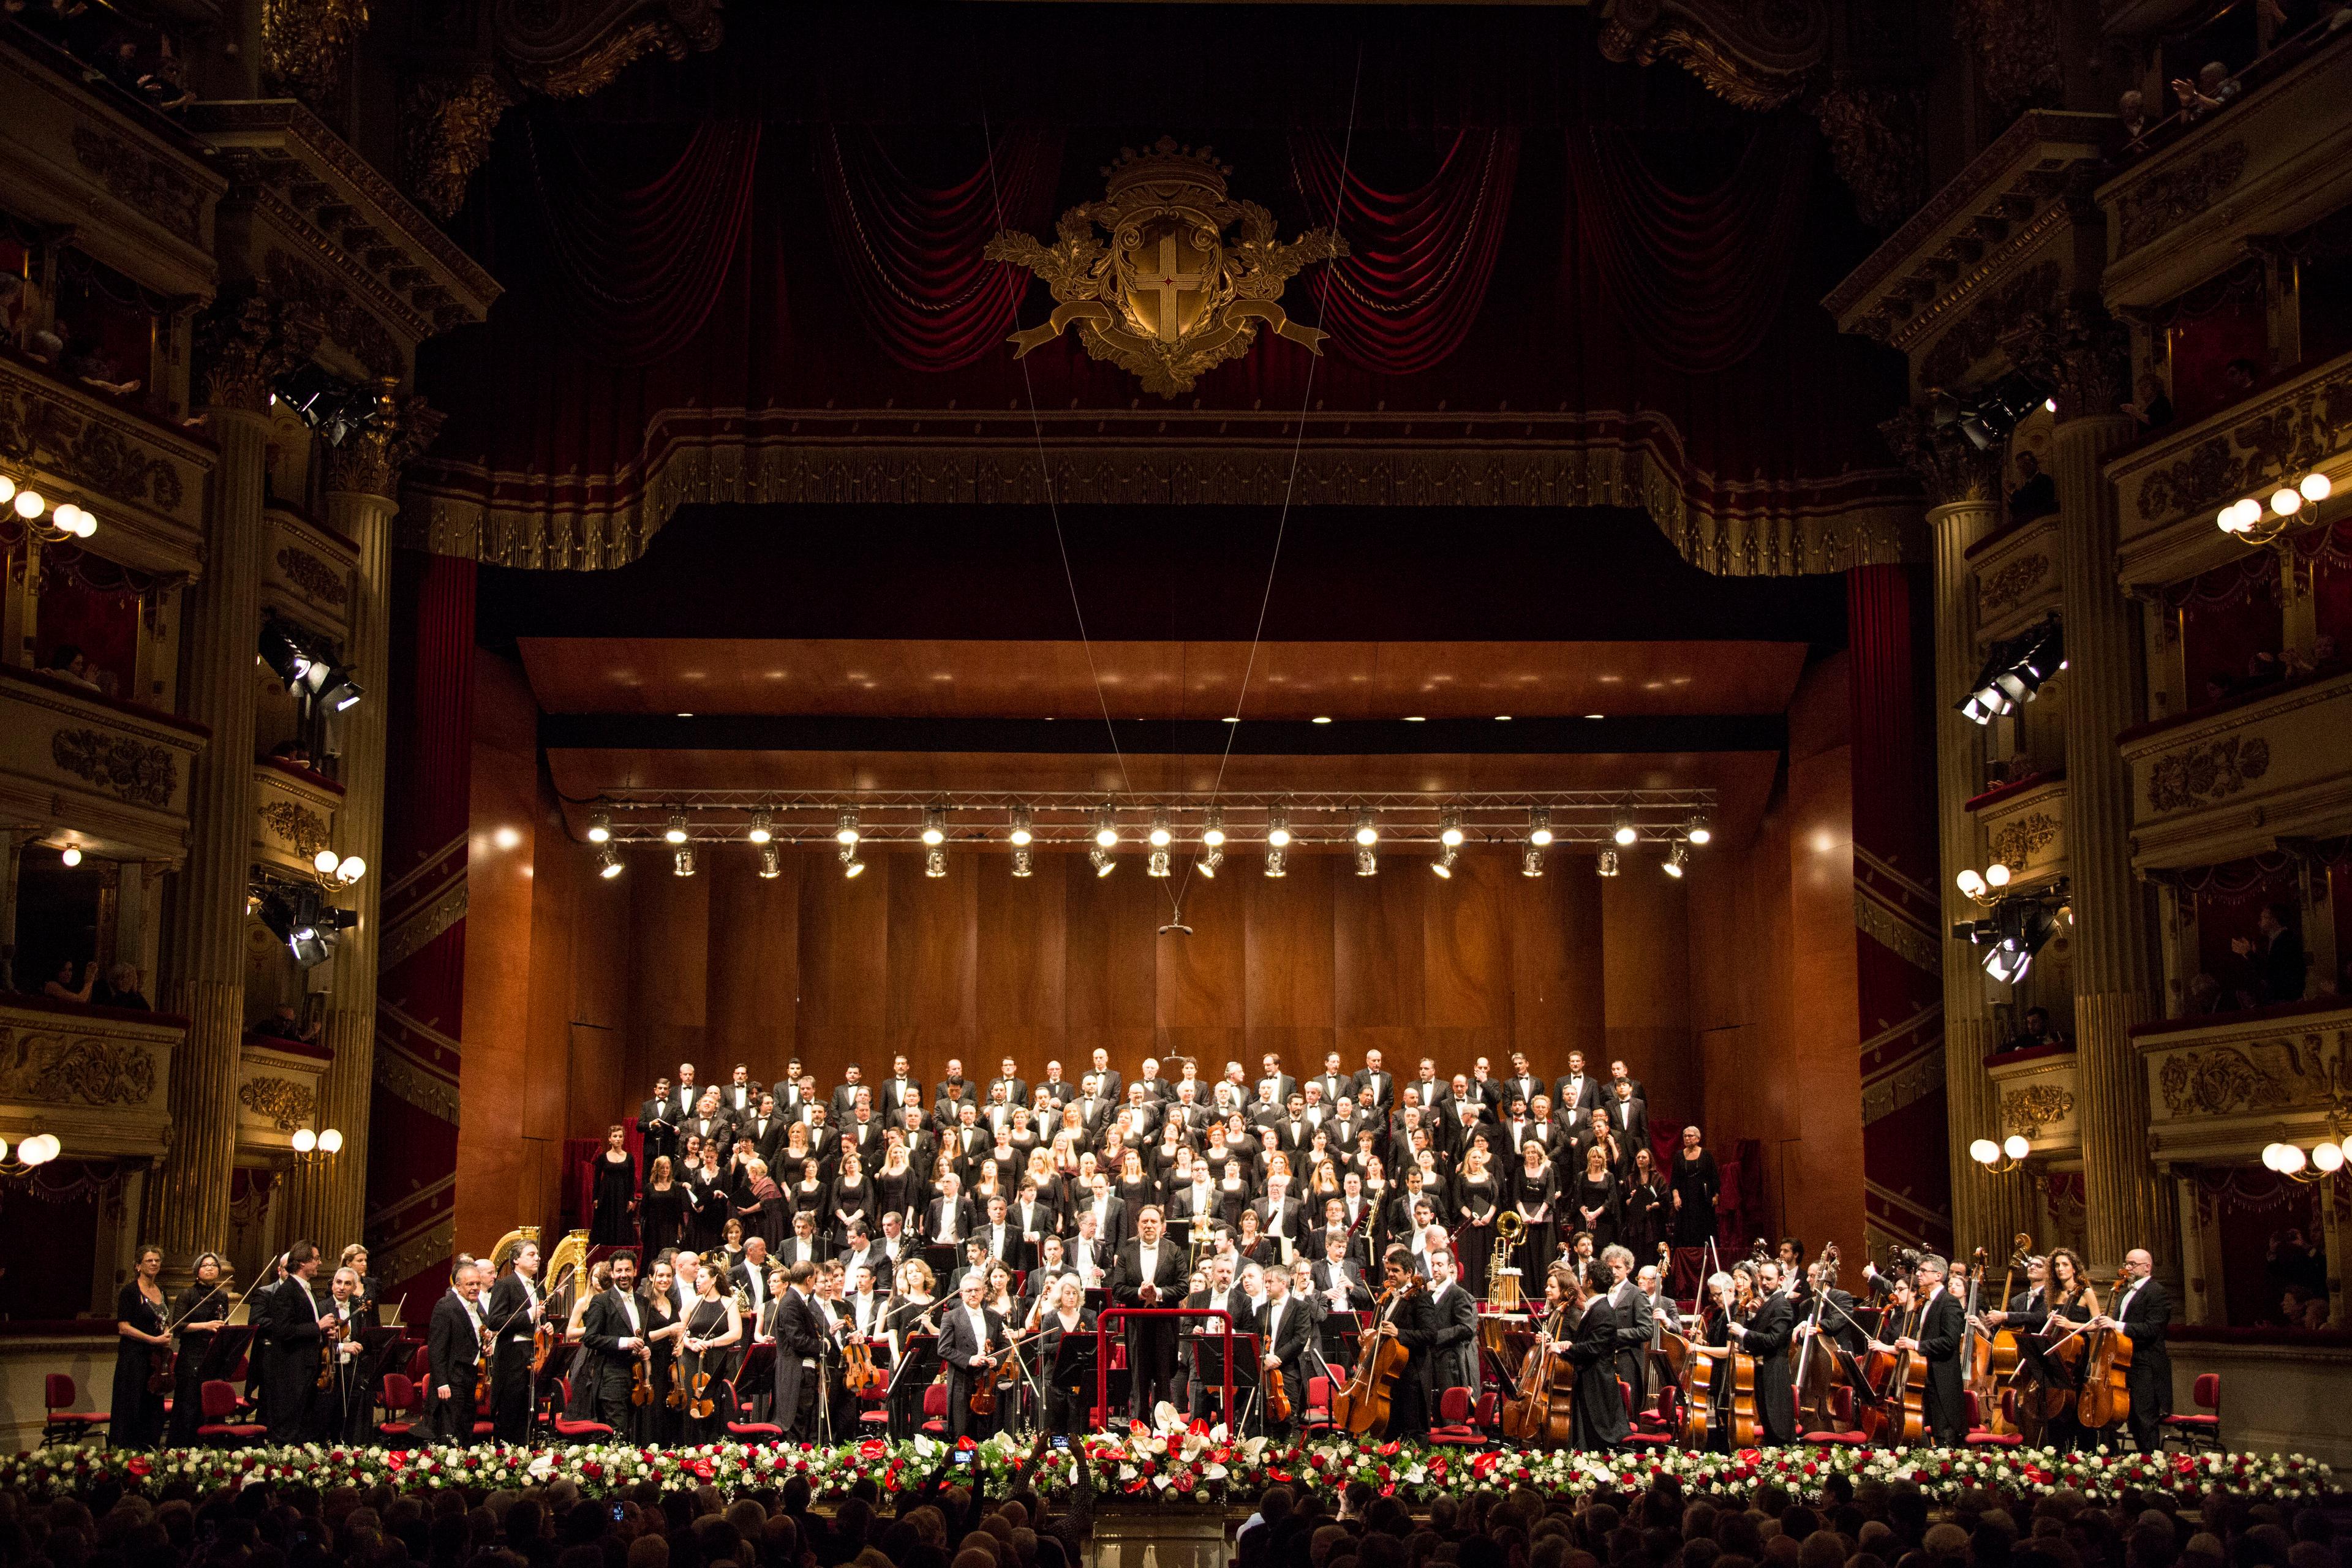 Teatro alla Scala on stage with the choir 